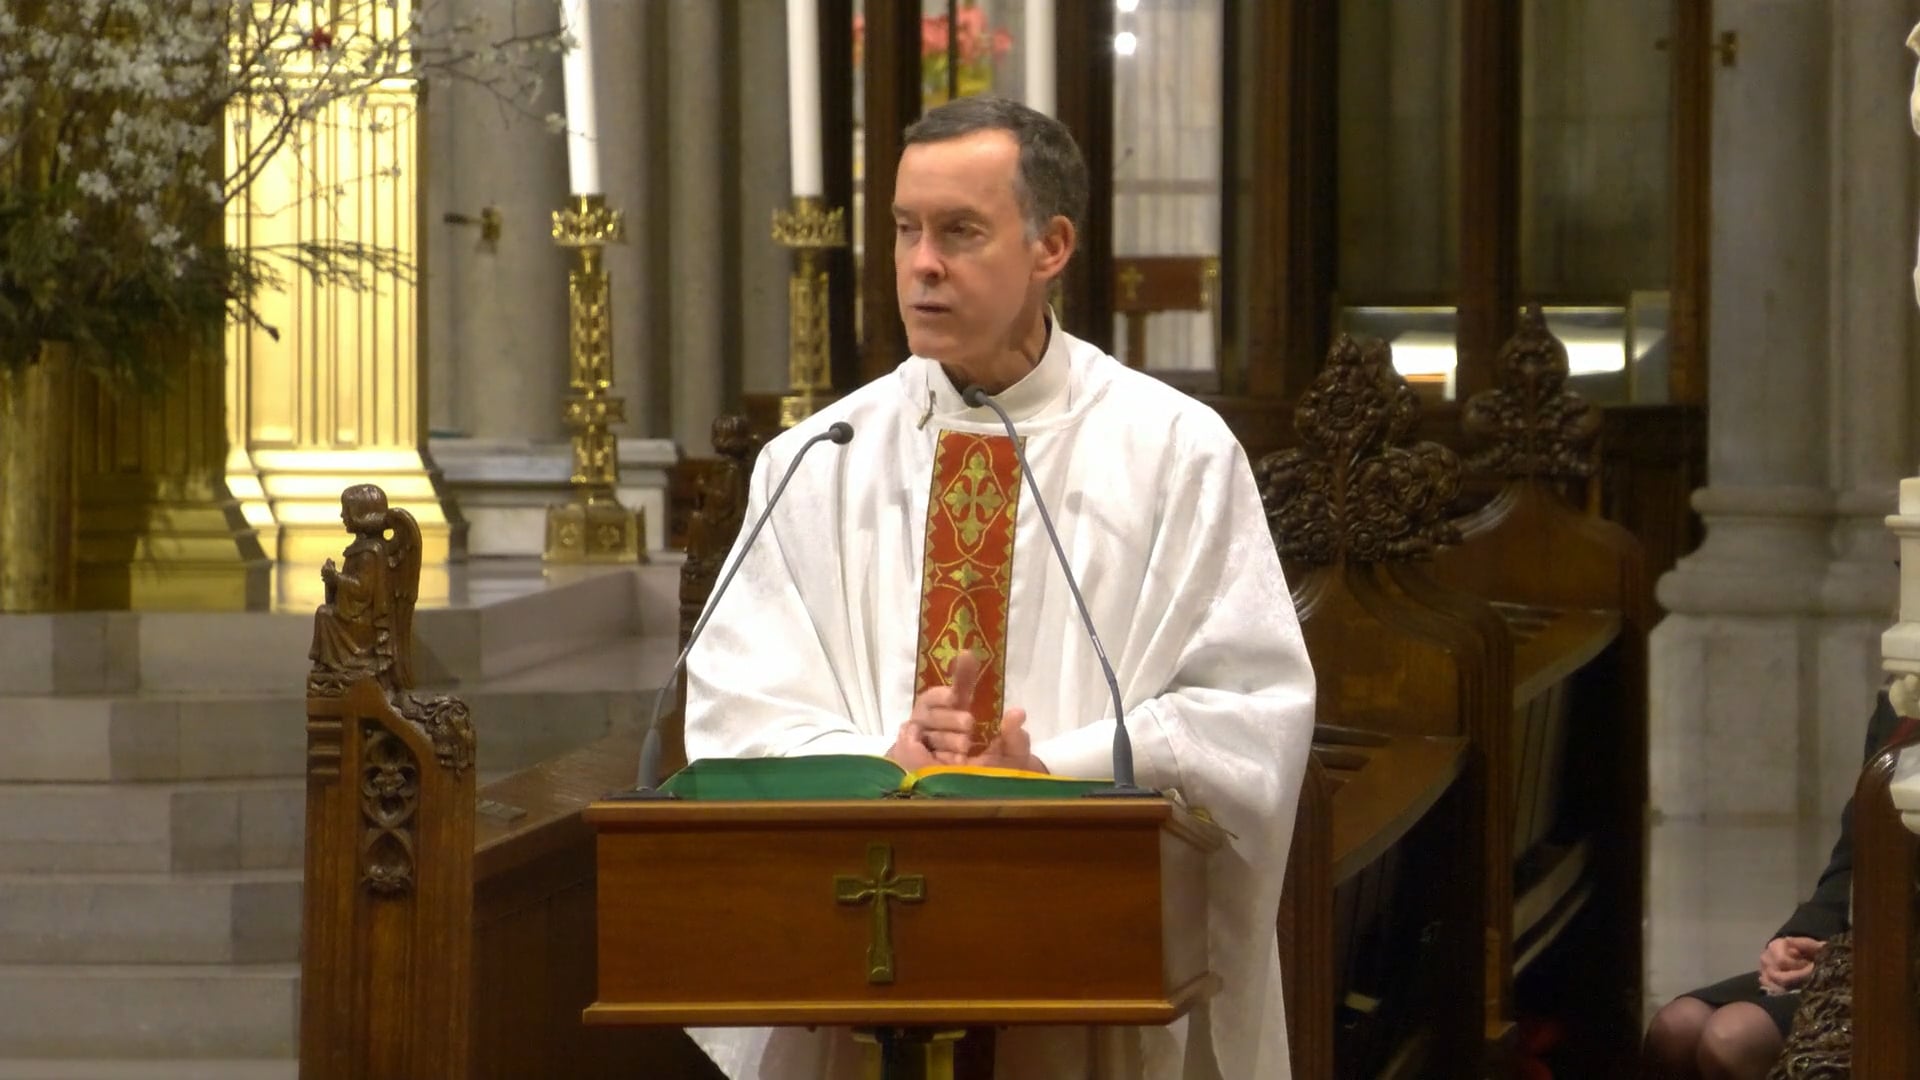 Mass from St. Patrick's Cathedral - January 12, 2023